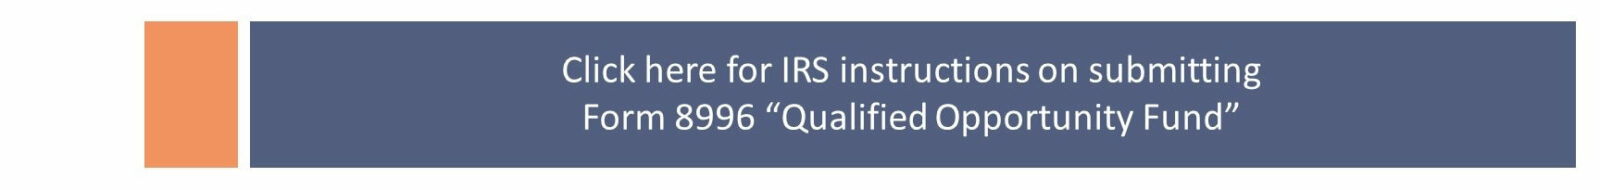 Form 8996 To Certify As A Qualified Opportunity Fund